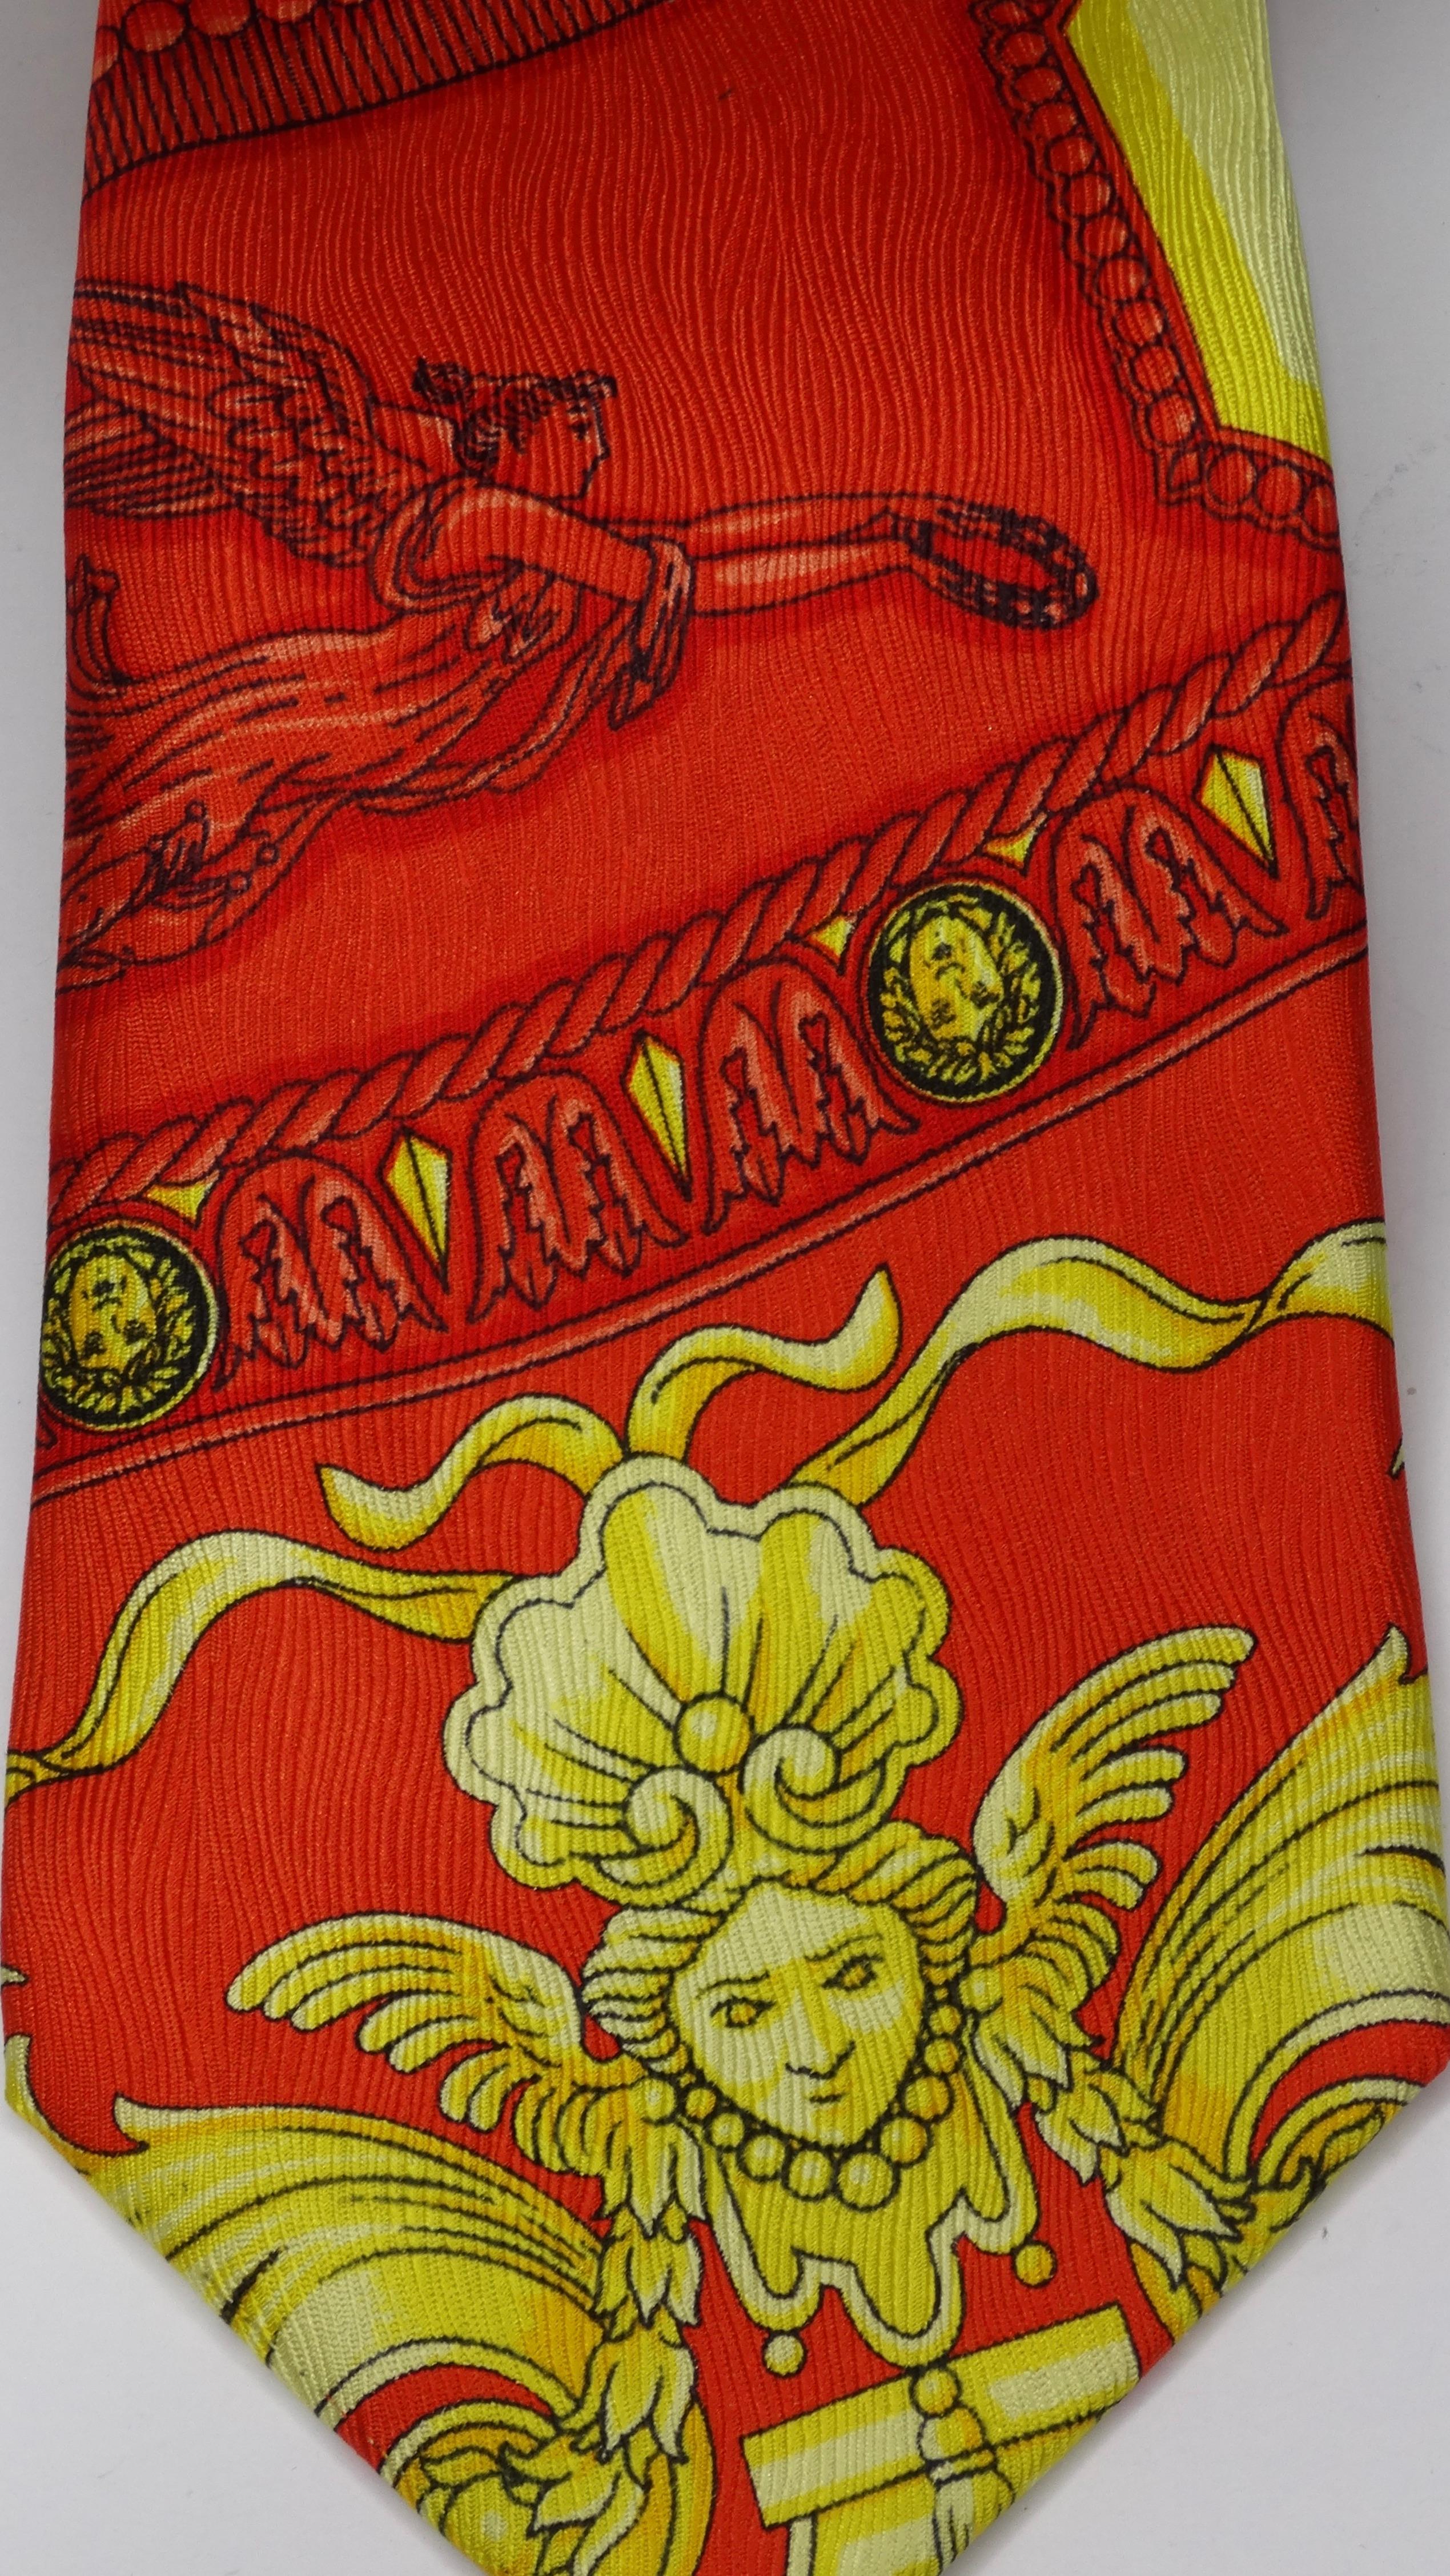 Snag yourself a piece from the Versace archives! Circa 1990s, this silk tie features a colorful roman clock motif with images throughout of Medusa and Baroque designs. Classic and timeless, this coveted piece will pair perfectly with your favorite